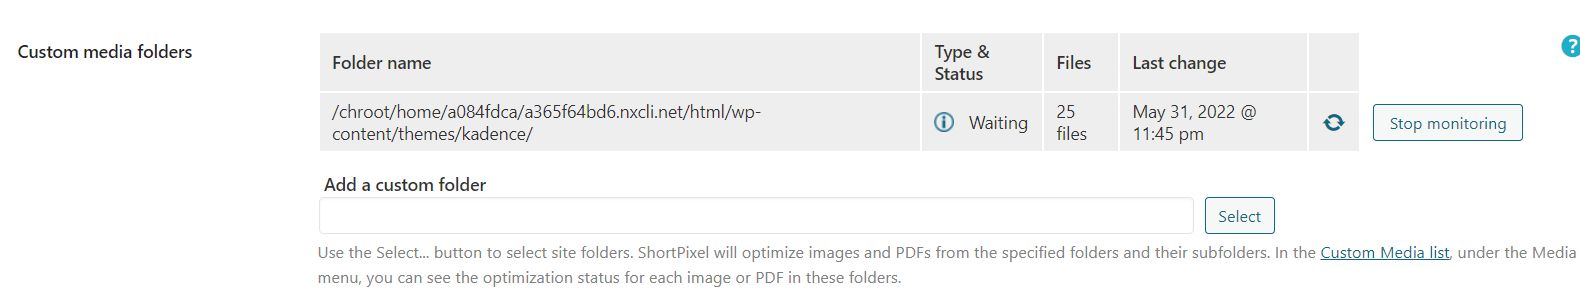 Images that are used by plugins and themes can also be optimized using ShortPixel but those custom folders would need to be added in the advanced menu of the plugin. Find the plugins or themes that you want to optimize and then add those folders.